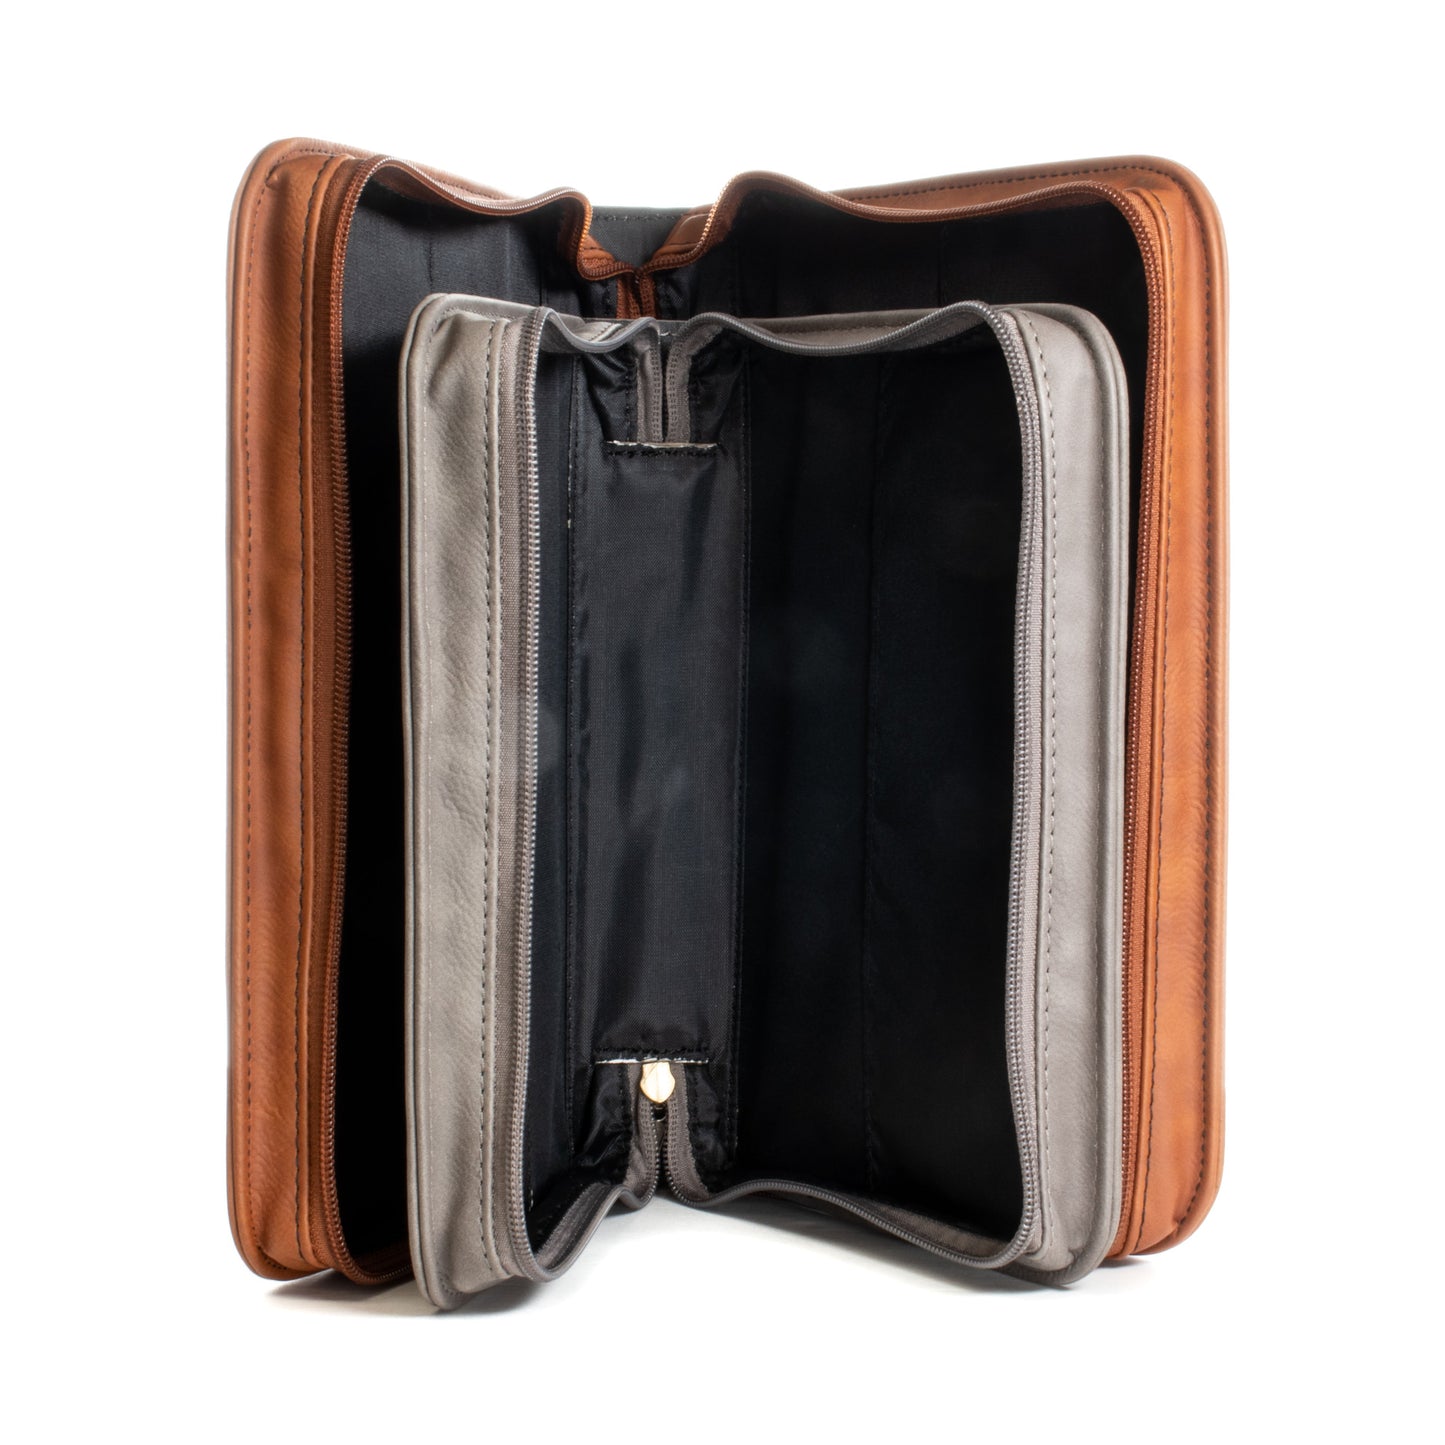 Inside Bible Cover Faux Leather With Pockets And Pen Holder Available In Two Sizes